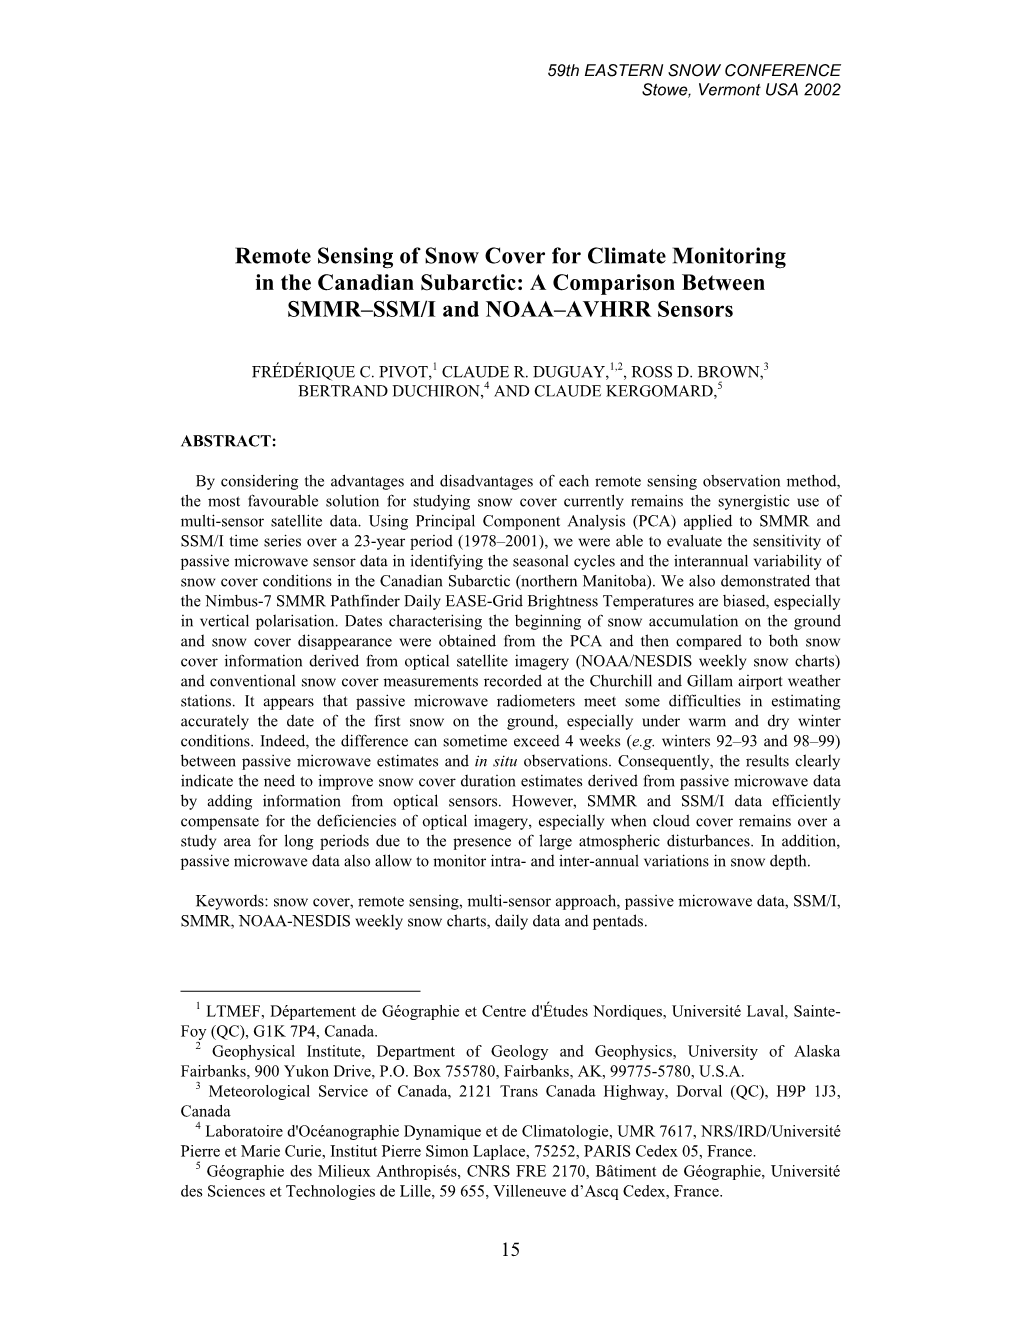 Remote Sensing of Snow Cover for Climate Monitoring in the Canadian Subarctic: a Comparison Between SMMR–SSM/I and NOAA–AVHRR Sensors